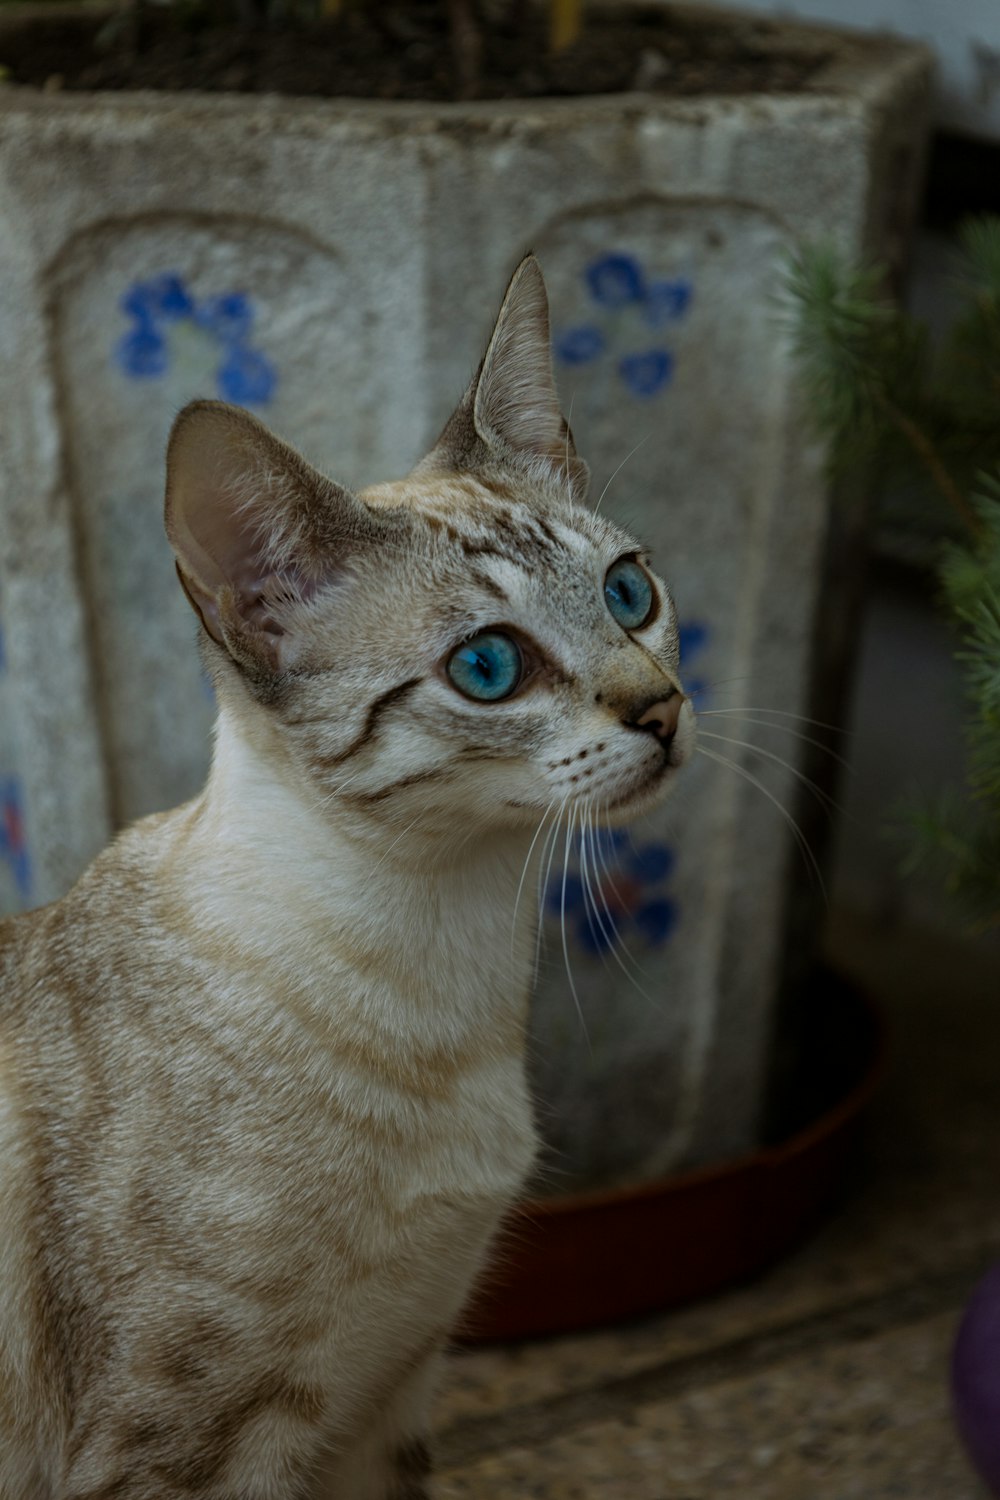 a cat with blue eyes sitting next to a potted plant